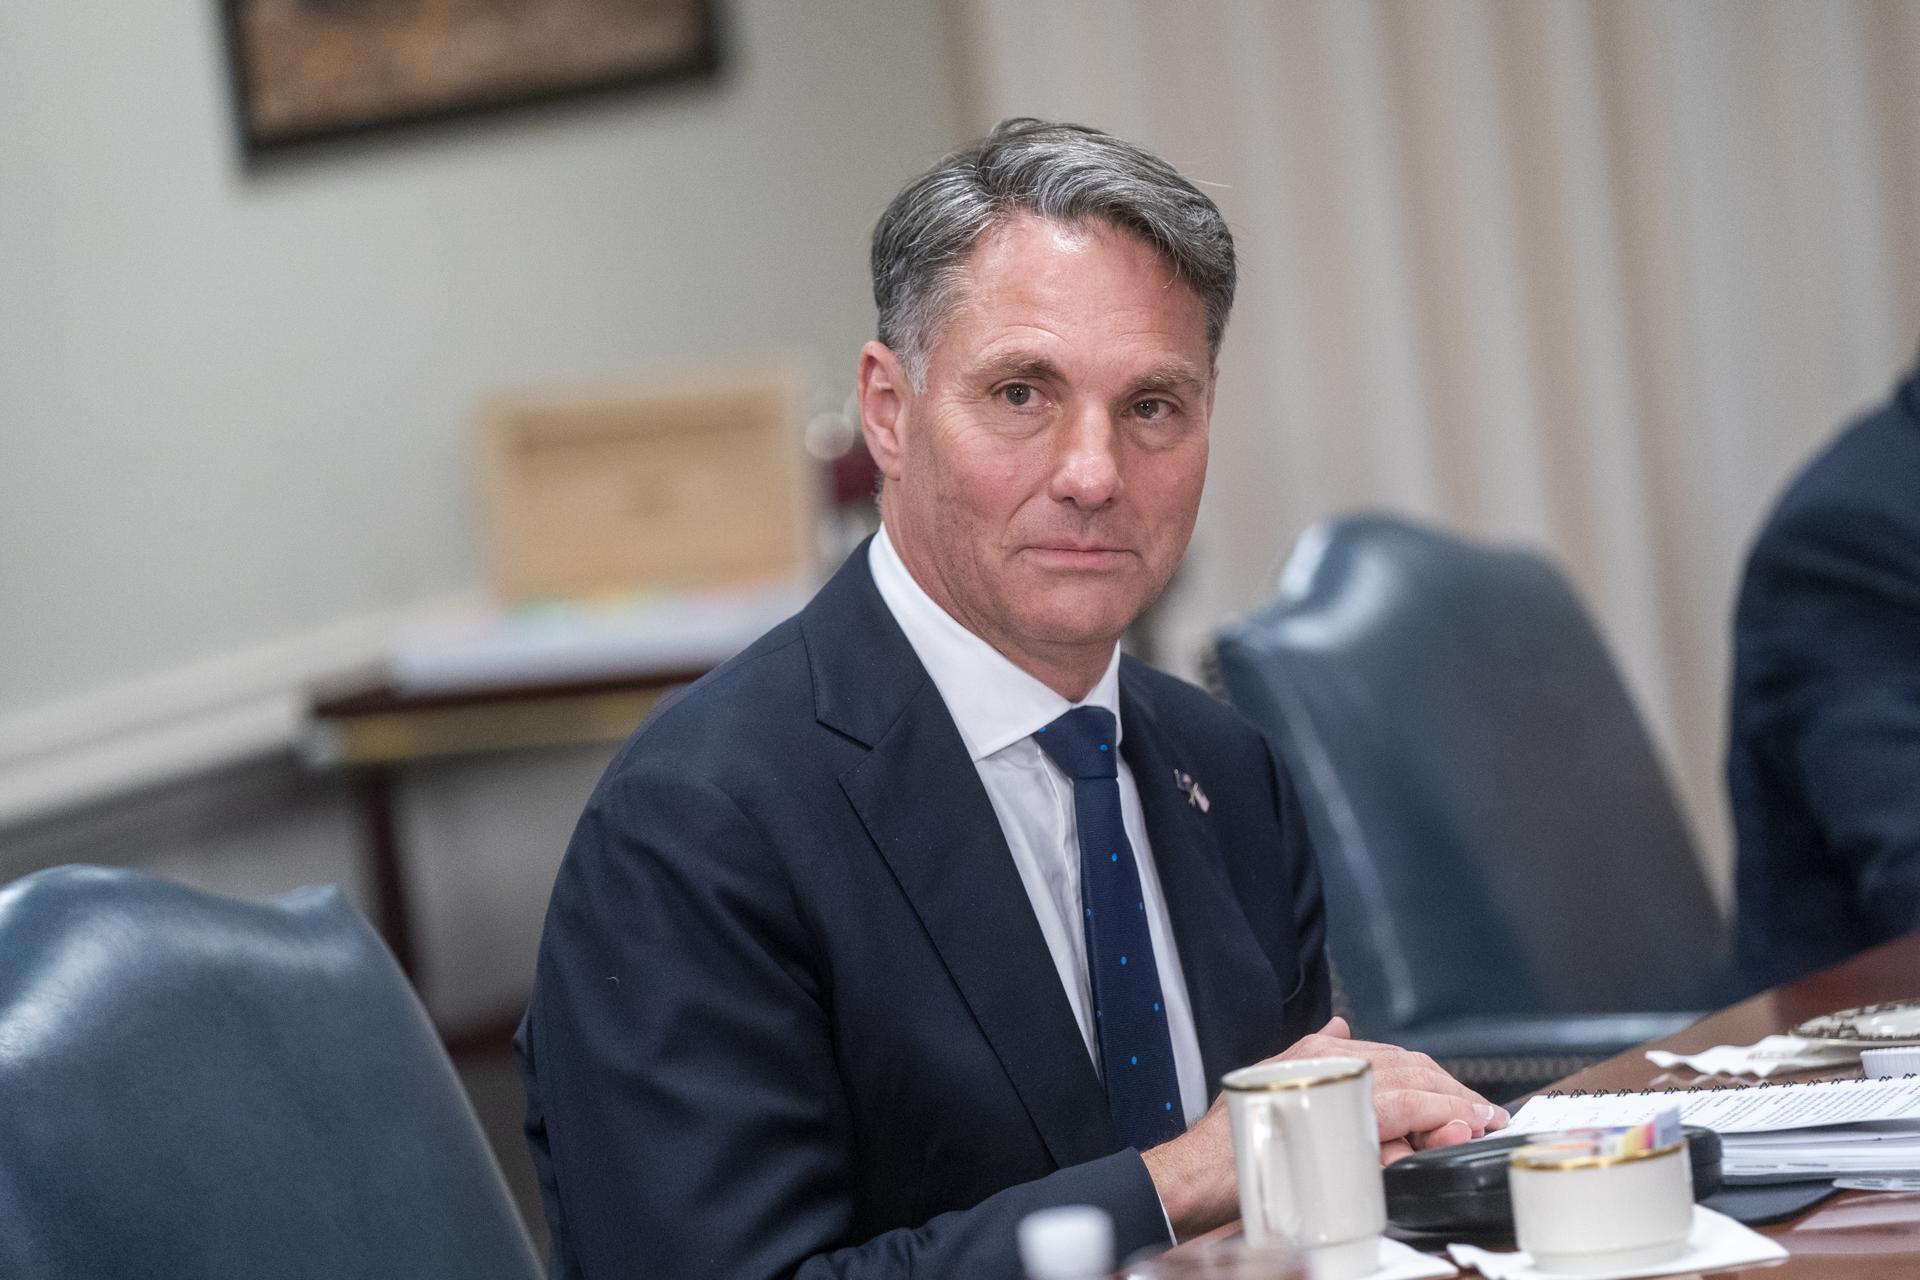 Australian Minister of Defense Richard Marles delivers remarks, during a meeting with US Secretary of Defense Lloyd Austin at the Pentagon in Arlington, Virginia, USA, 13 July 2022. EFE-EPA/SHAWN THEW/FILE